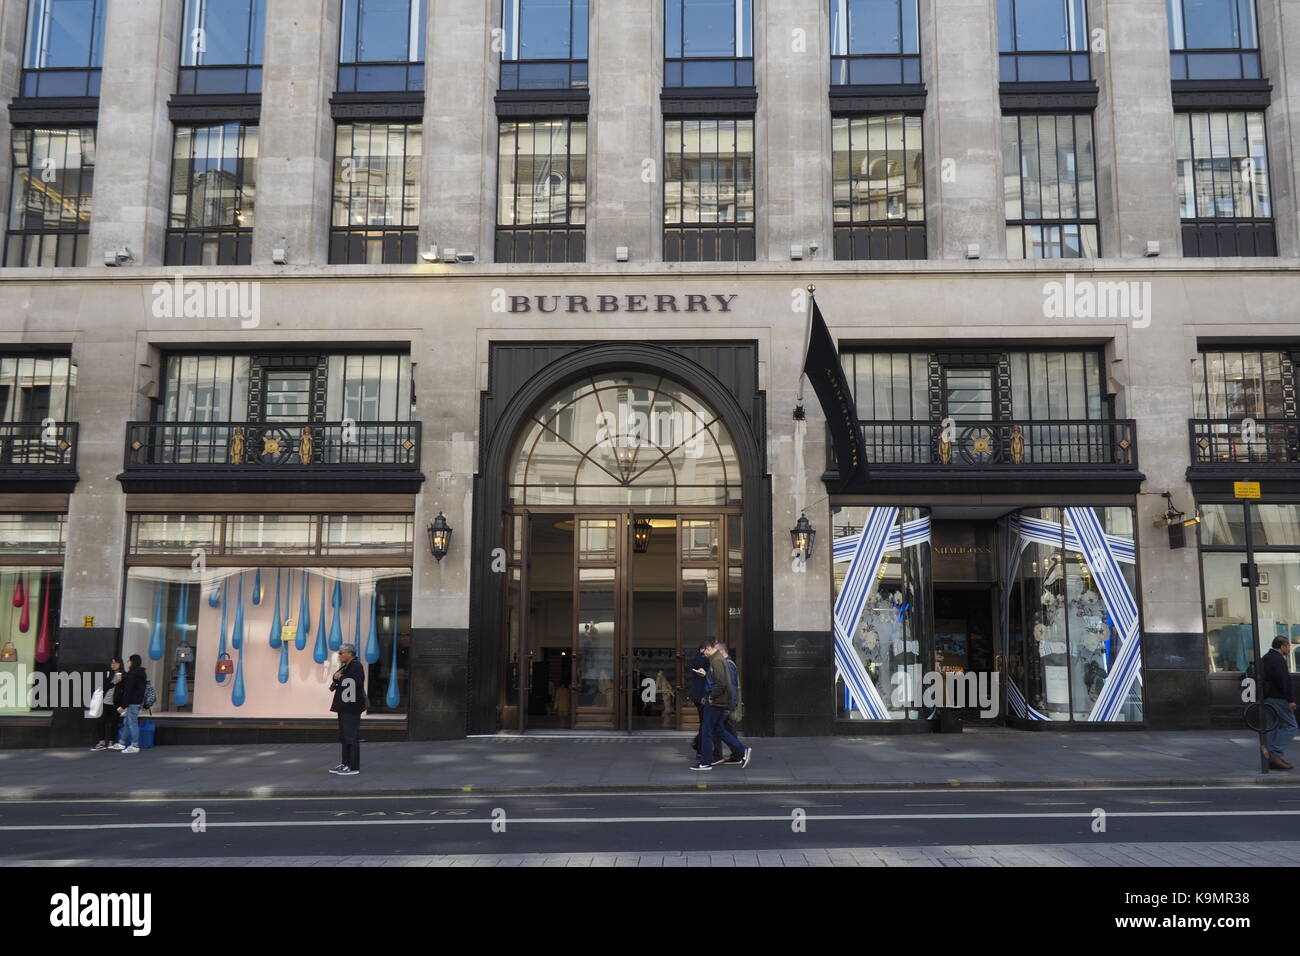 burberry london stores - OFF-70% > Shipping free